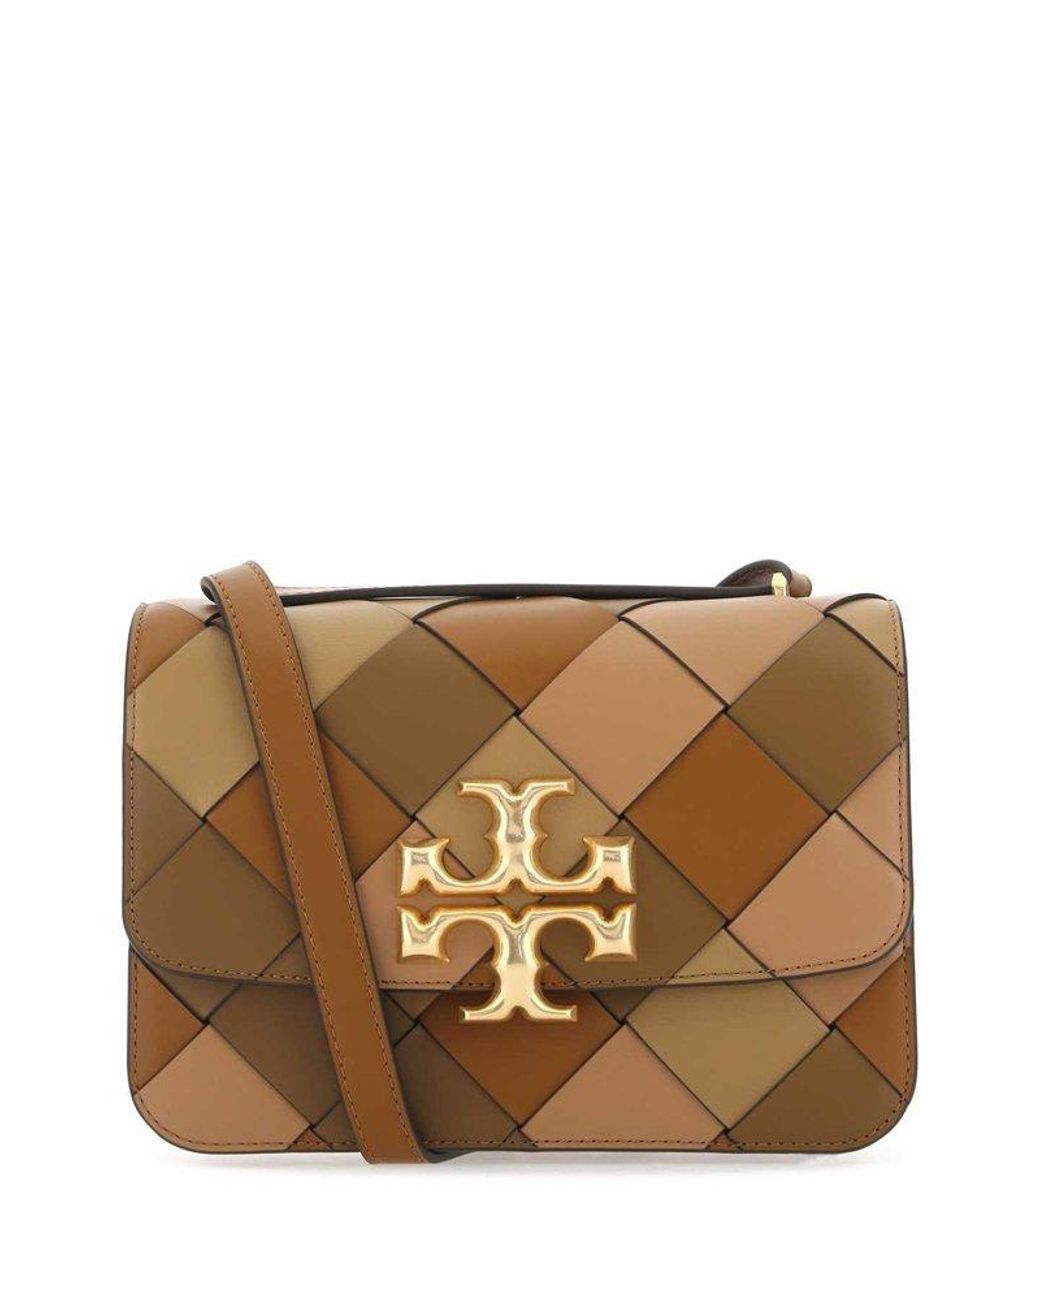 Tory Burch Multicolor Leather Eleanor Crossbody Bag in Brown | Lyst